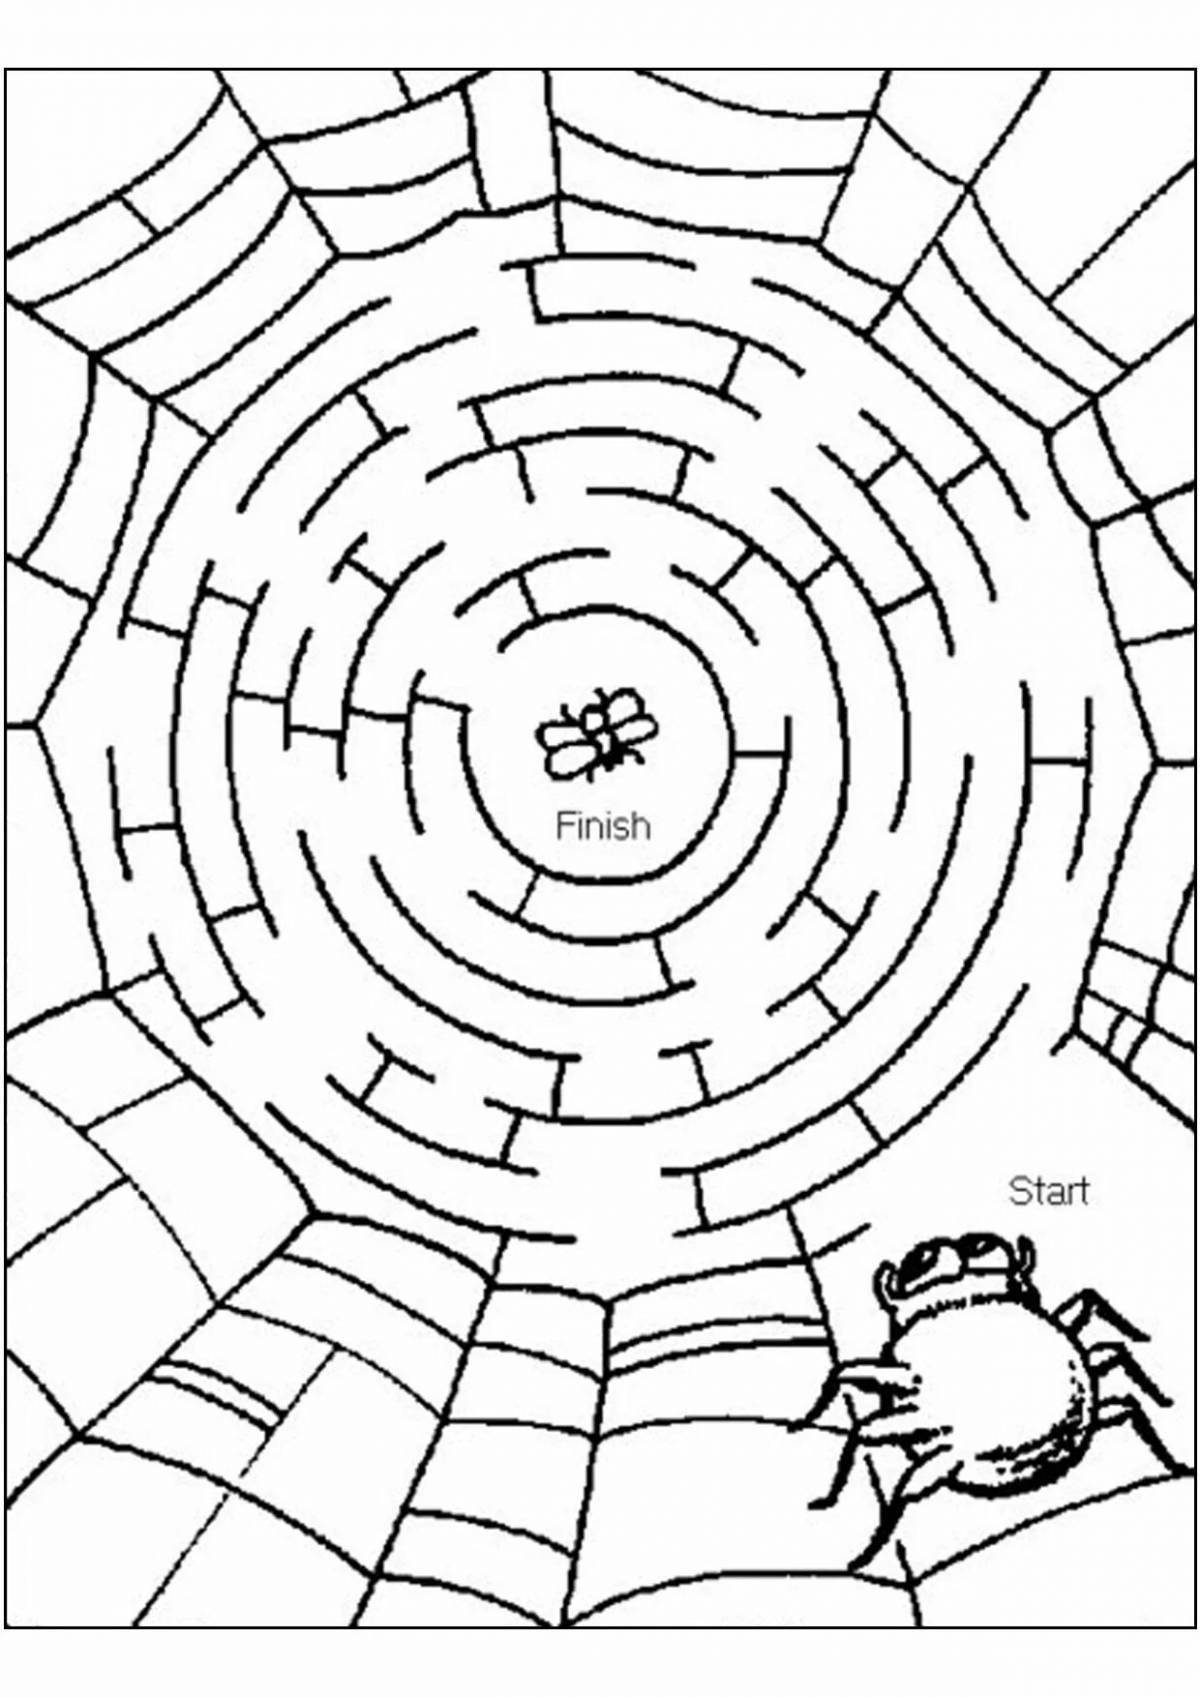 Mazes for children 9 10 years old #7